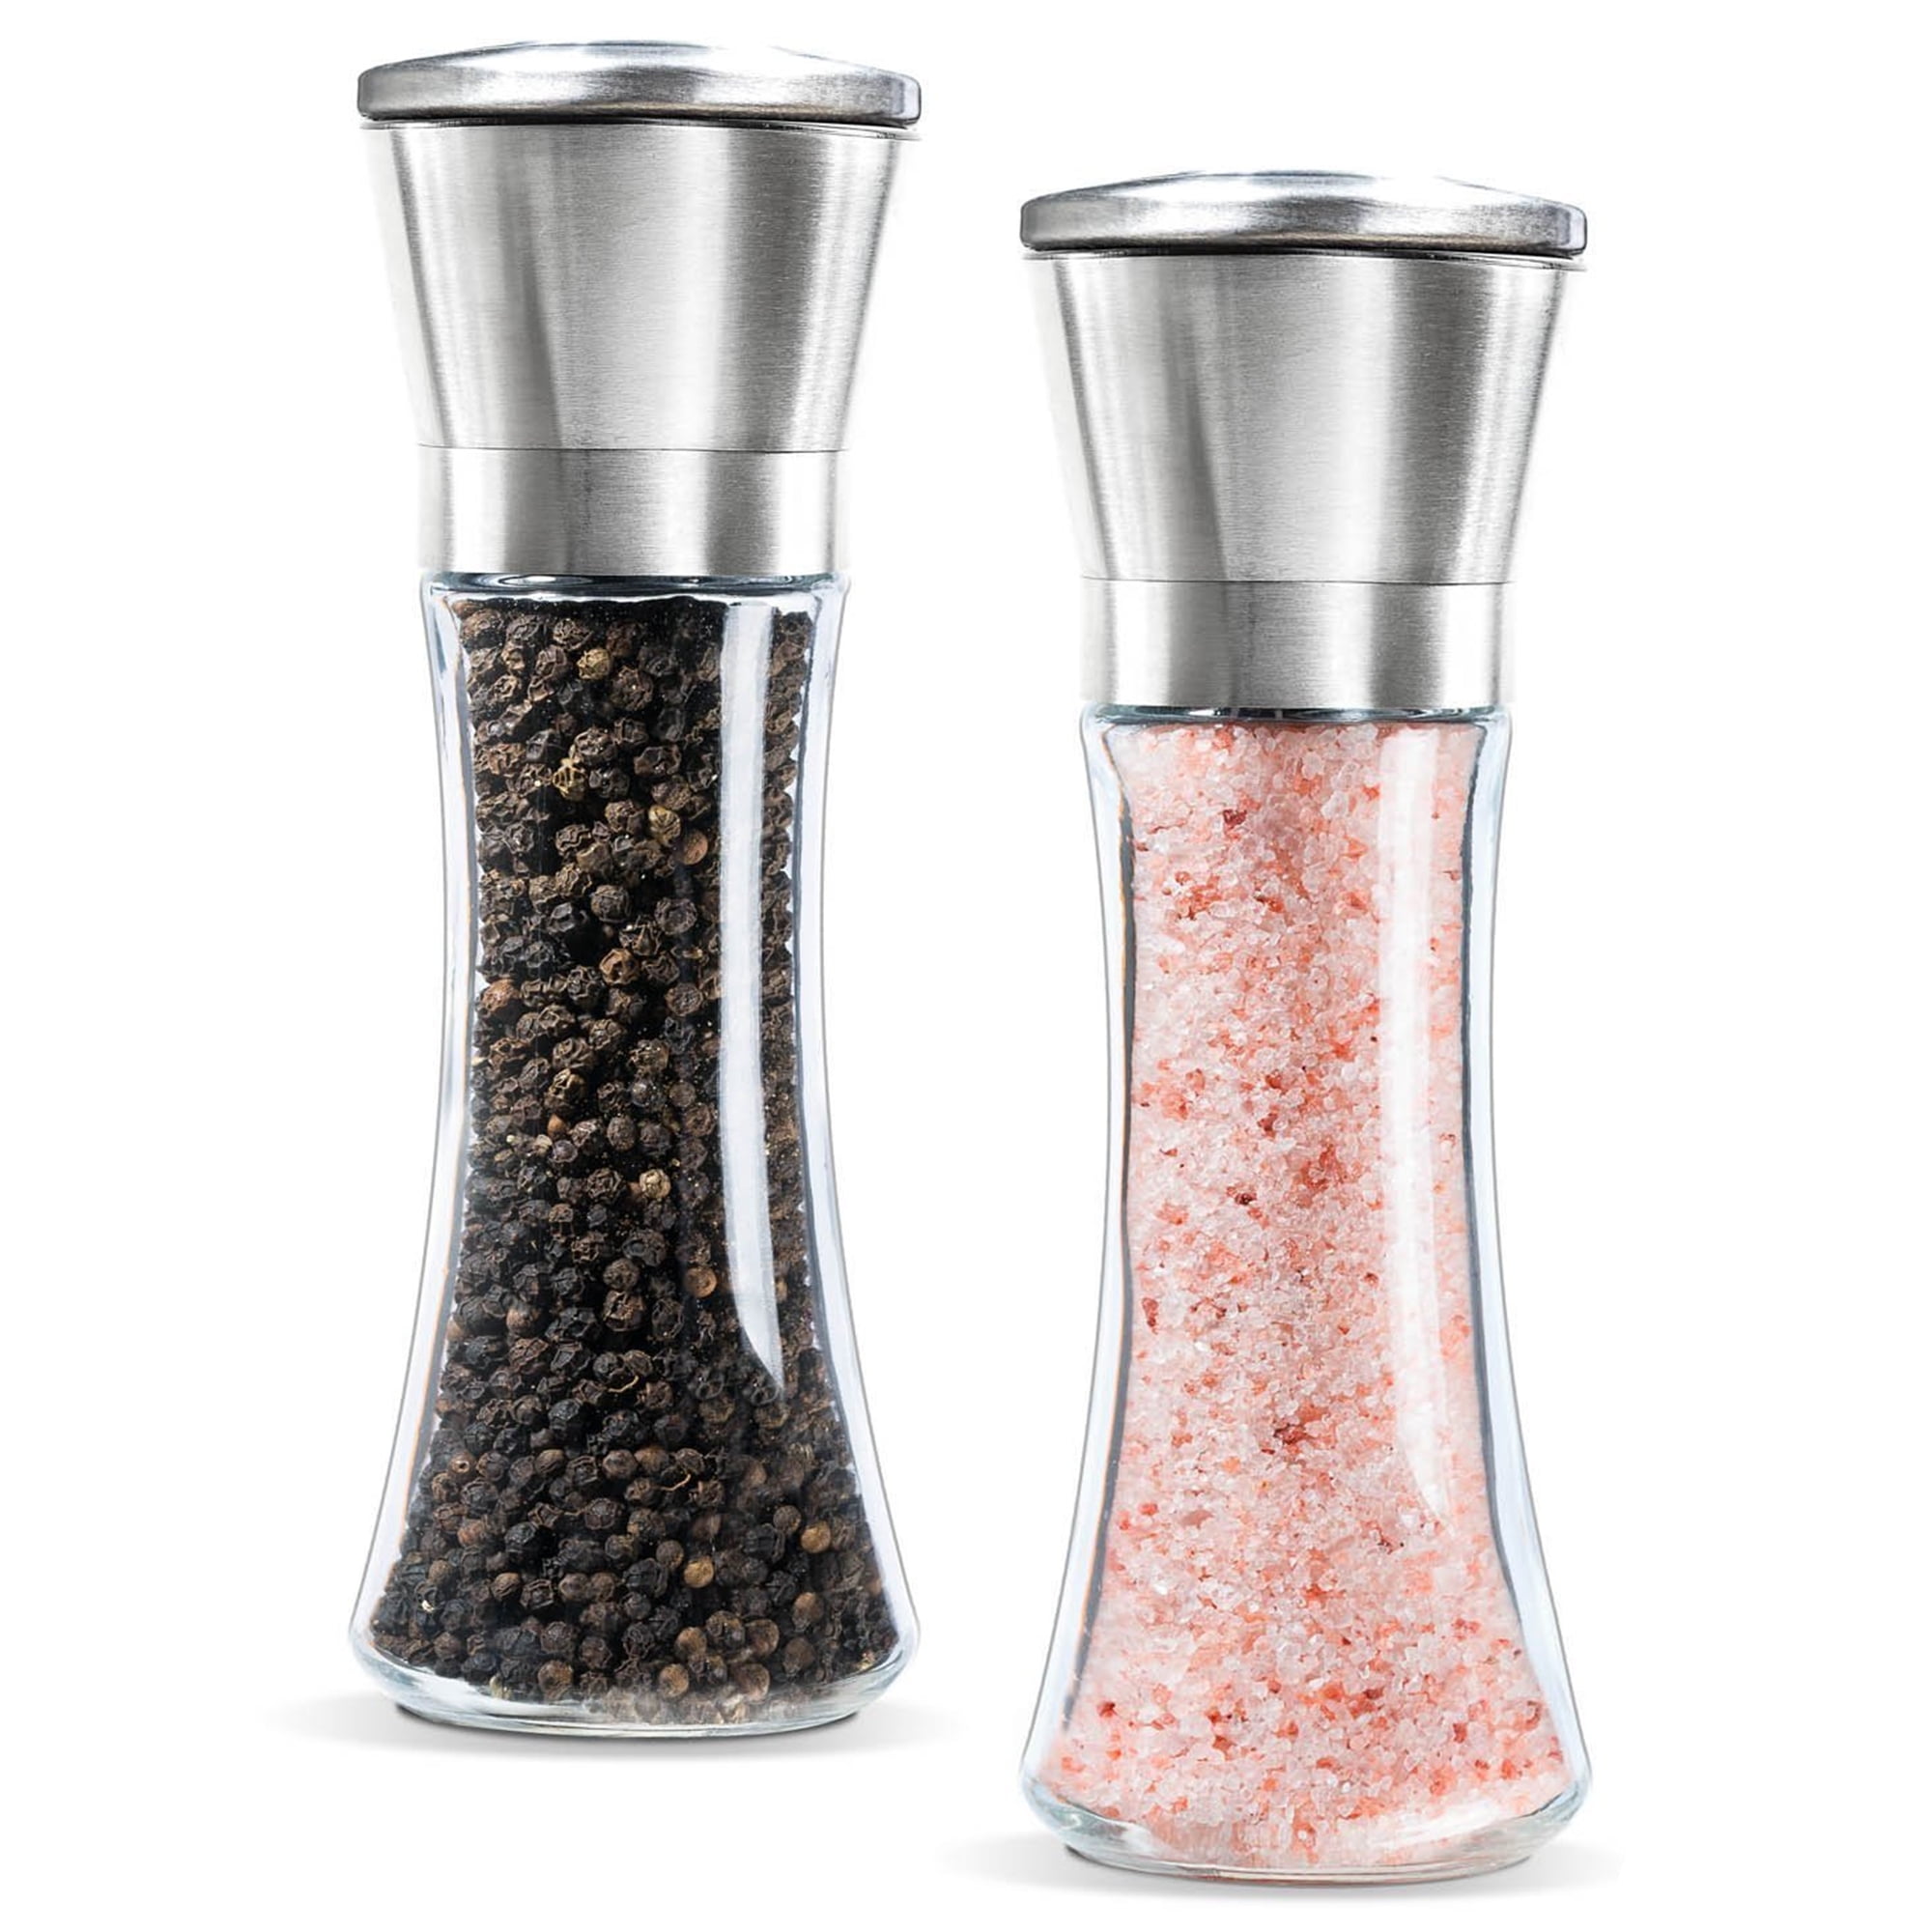 Salt and Pepper Grinder - Premium Stainless Steel Salt and Pepper Mill with Adjustable Coarseness - 2pcs Small Cylinder Single Head